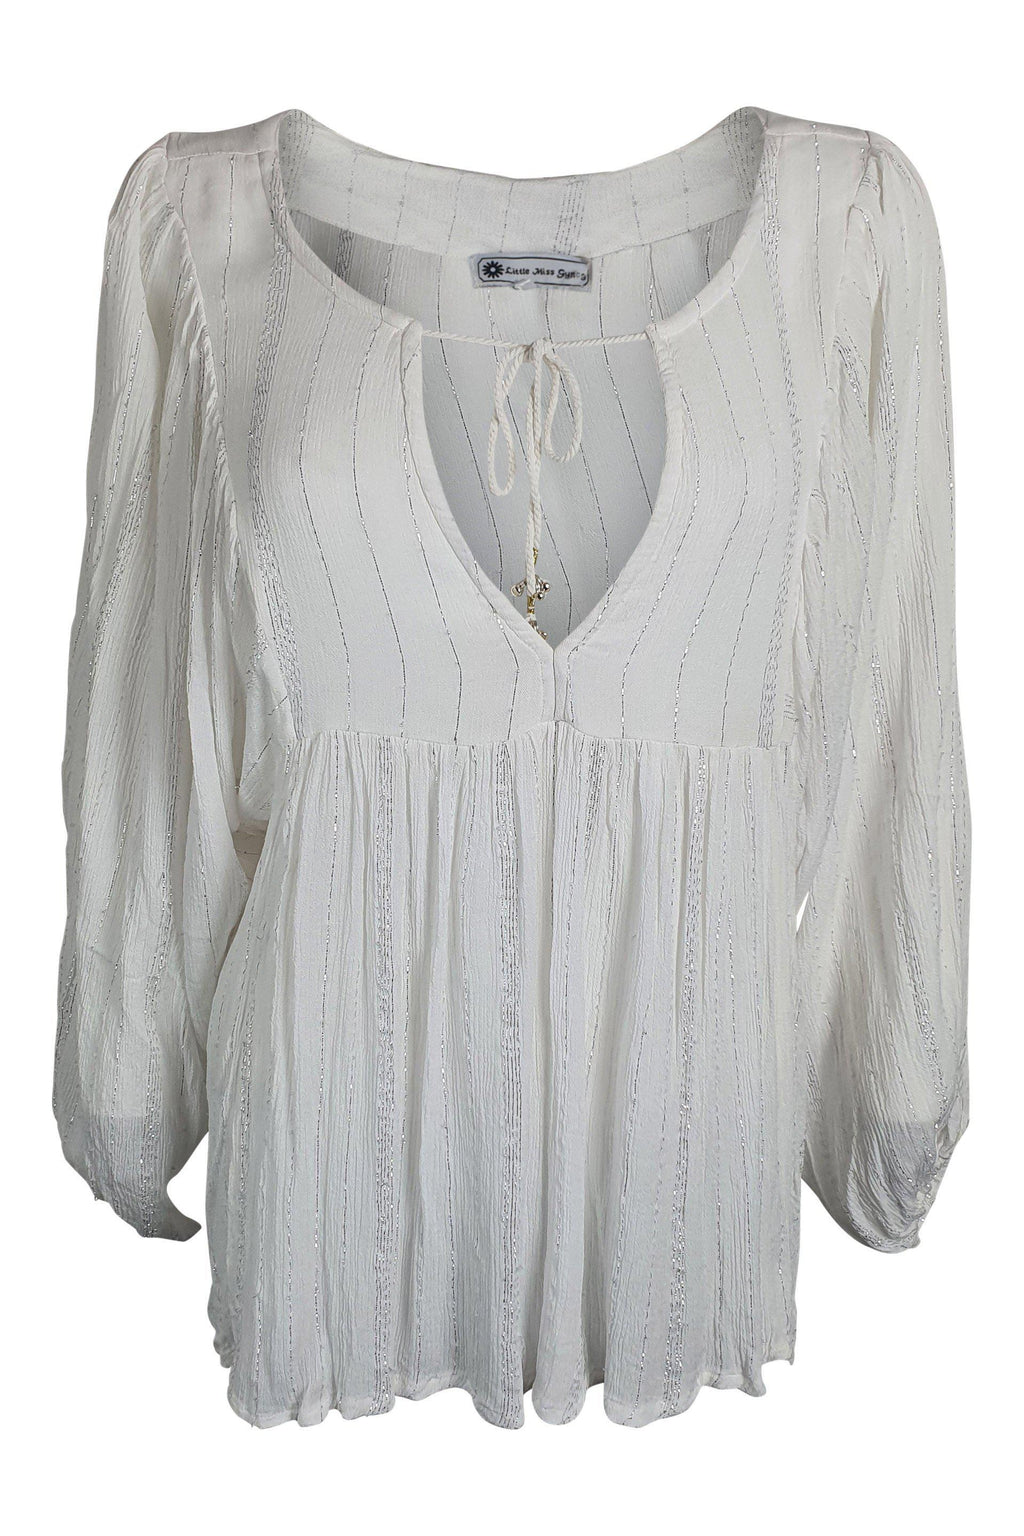 LITTLE MISS GYPSY White Garden Party Tie Front Blouse (M/L)-The Freperie